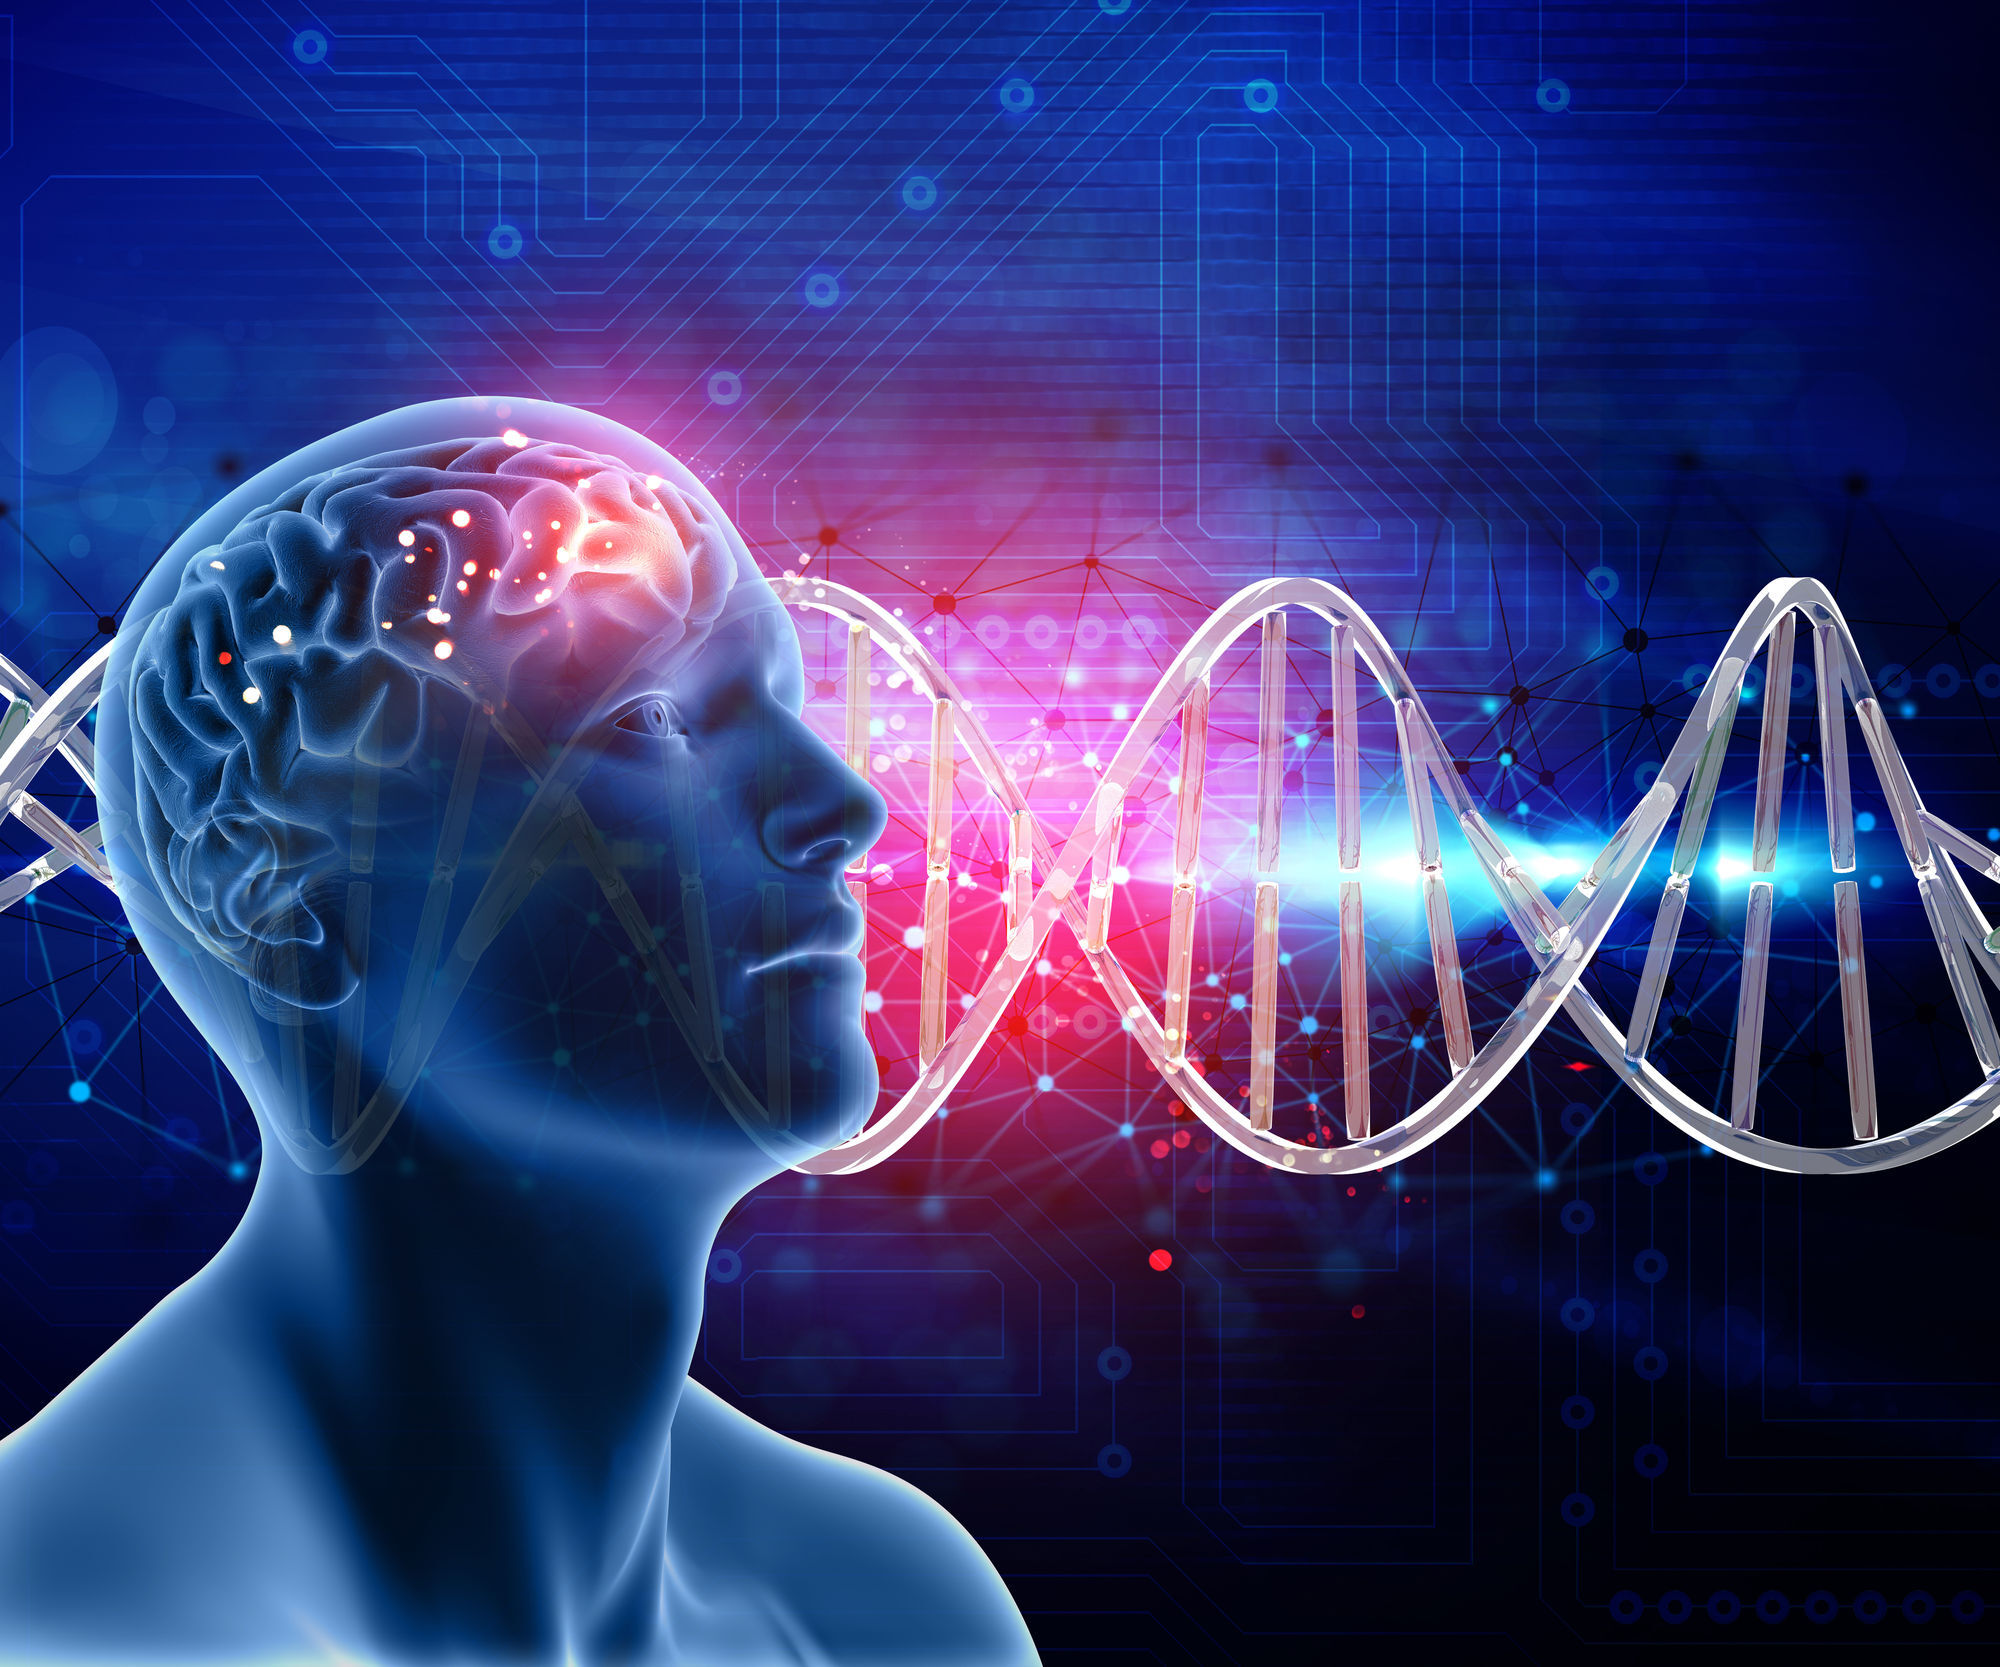 Can Your Genetic Code Shape Your Mental Health Destiny?